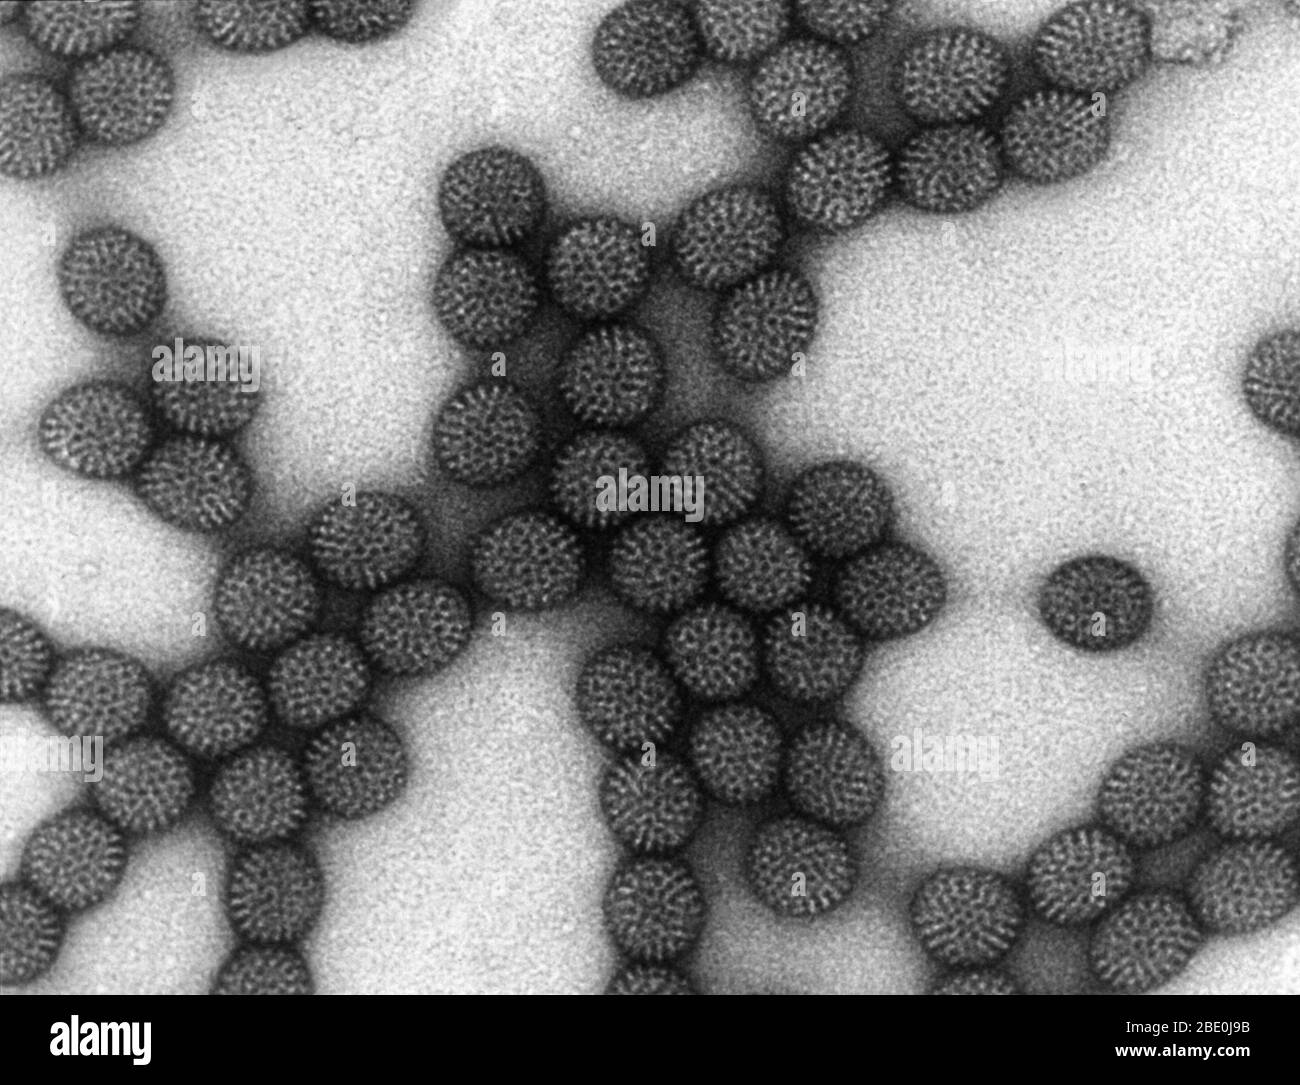 Transmission Electron Micrograph (TEM) of Rotavirus. Group A rotavirus is endemic worldwide. It is the leading cause of severe diarrhea among infants and children, and accounts for about half of the cases requiring hospitalization. Rotavirus is usually an easily managed disease of childhood, but in 2013, rotavirus caused 37% of deaths of children from diarrhea and 215,000 deaths worldwide, and almost 2 million more become severely ill. Most of these deaths occurred in developing countries. In the United States, before initiation of the rotavirus vaccination program, rotavirus caused about 2.7 Stock Photo